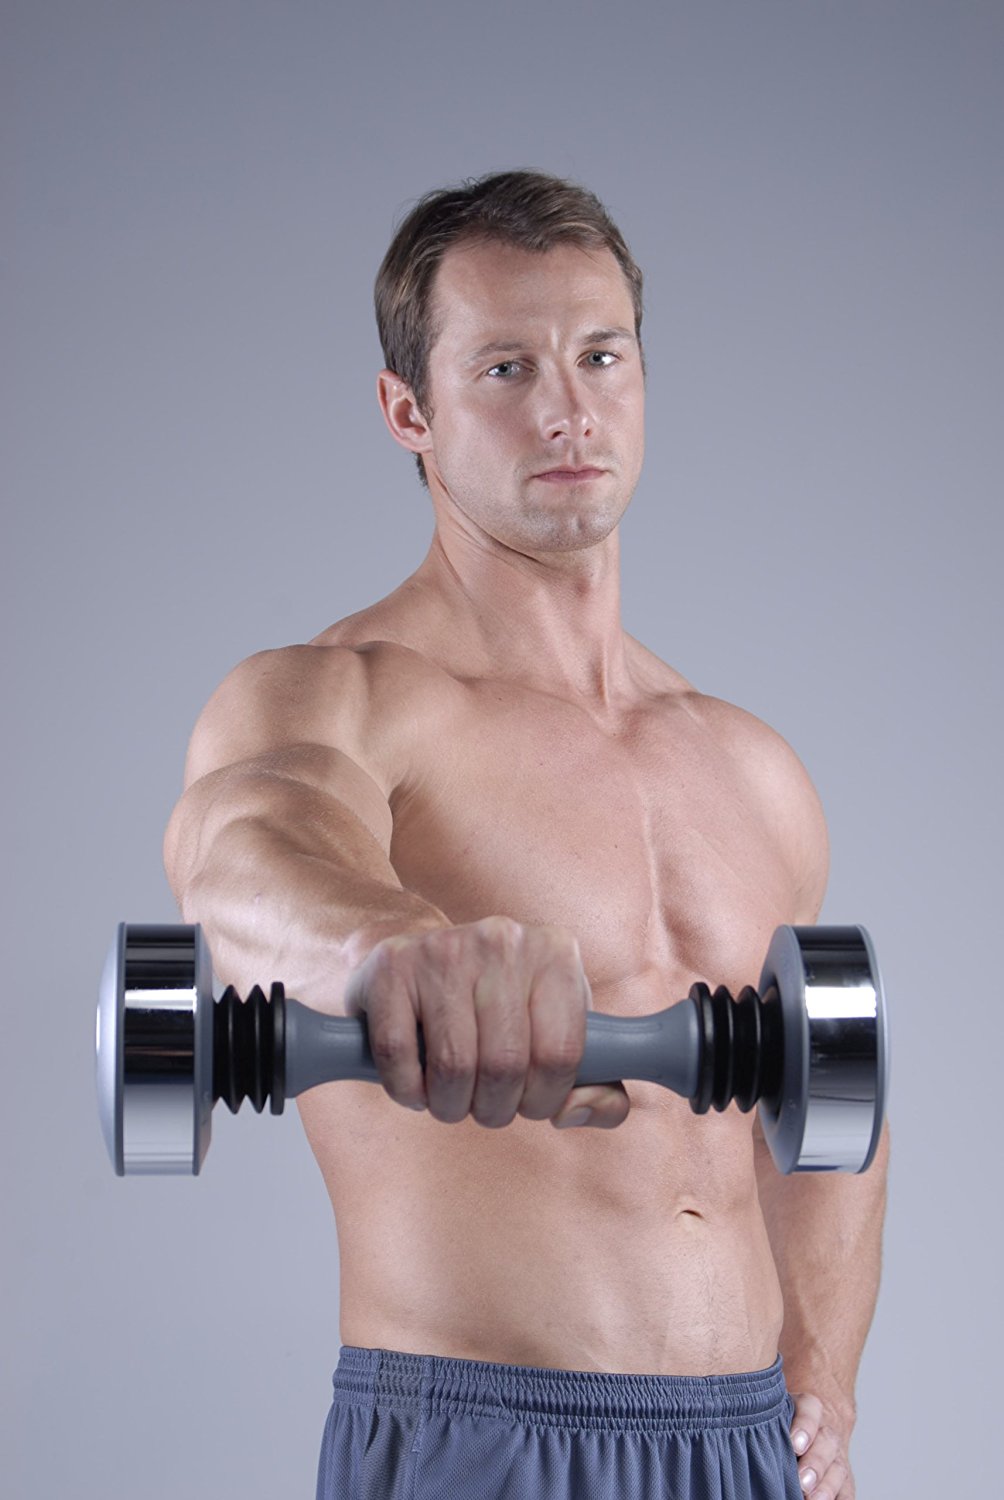 Shake Weight for Men Increases Muscle More